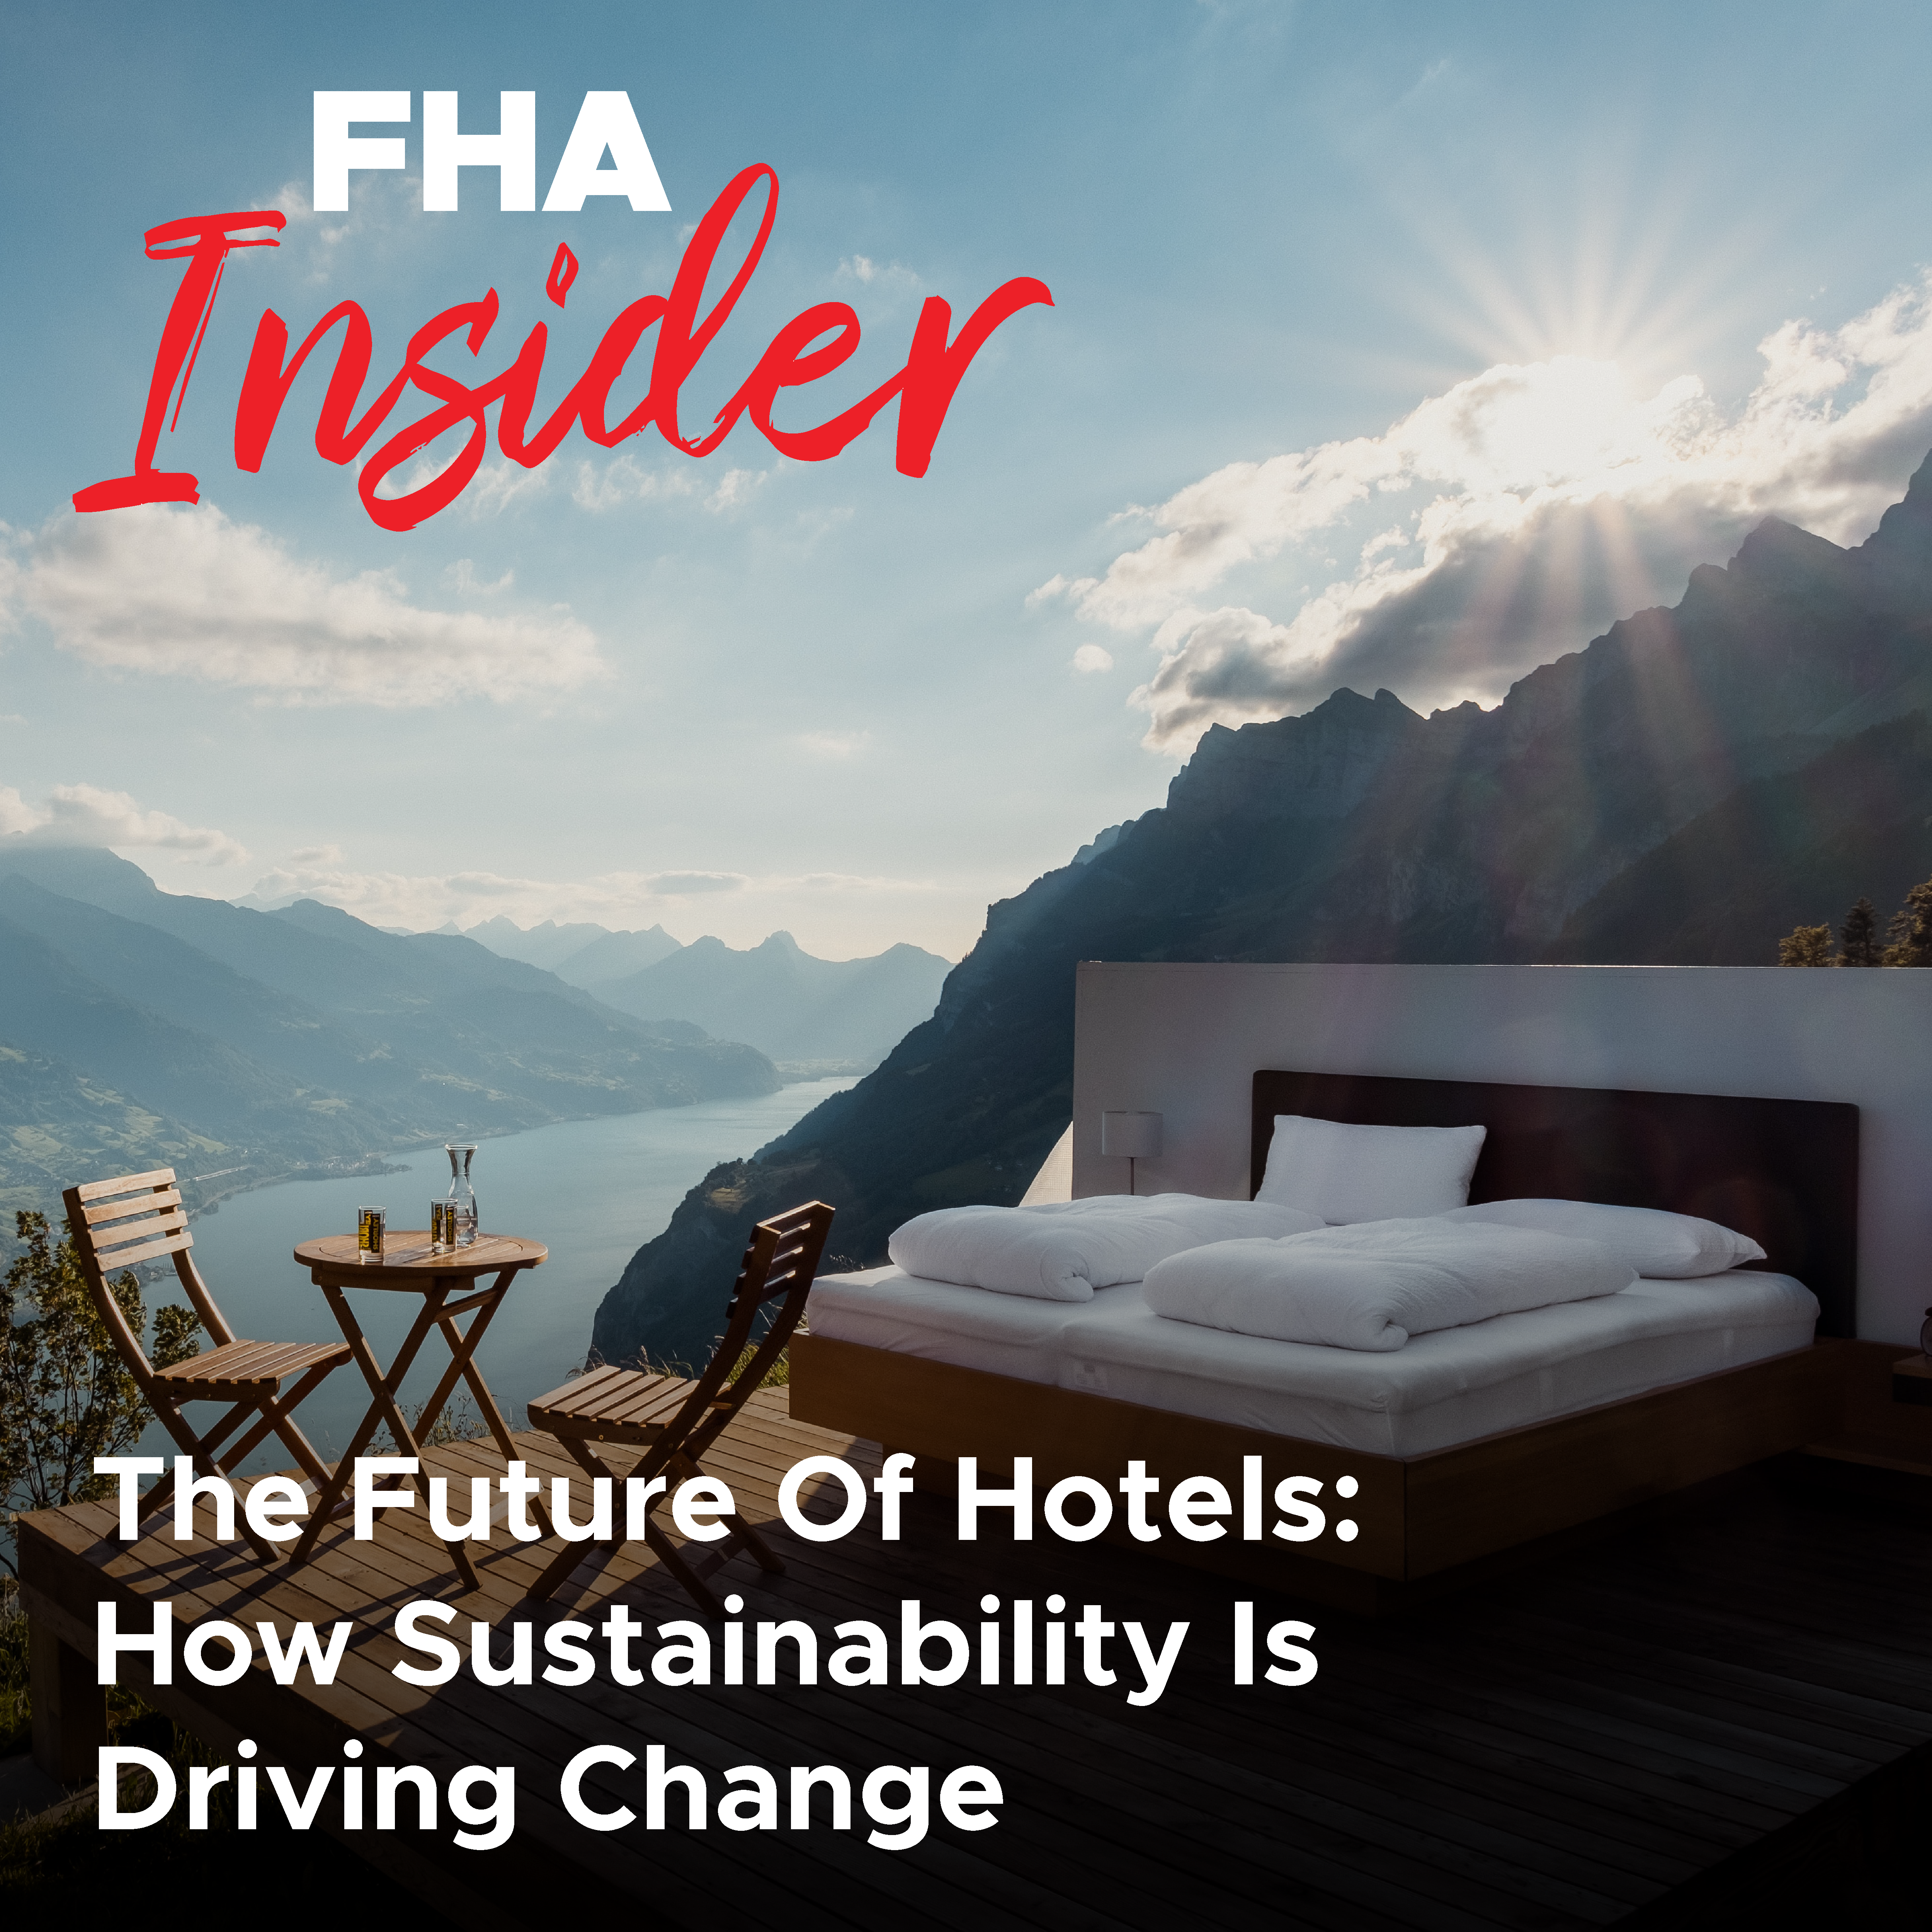 The Future of Hotels: How sustainability is driving change